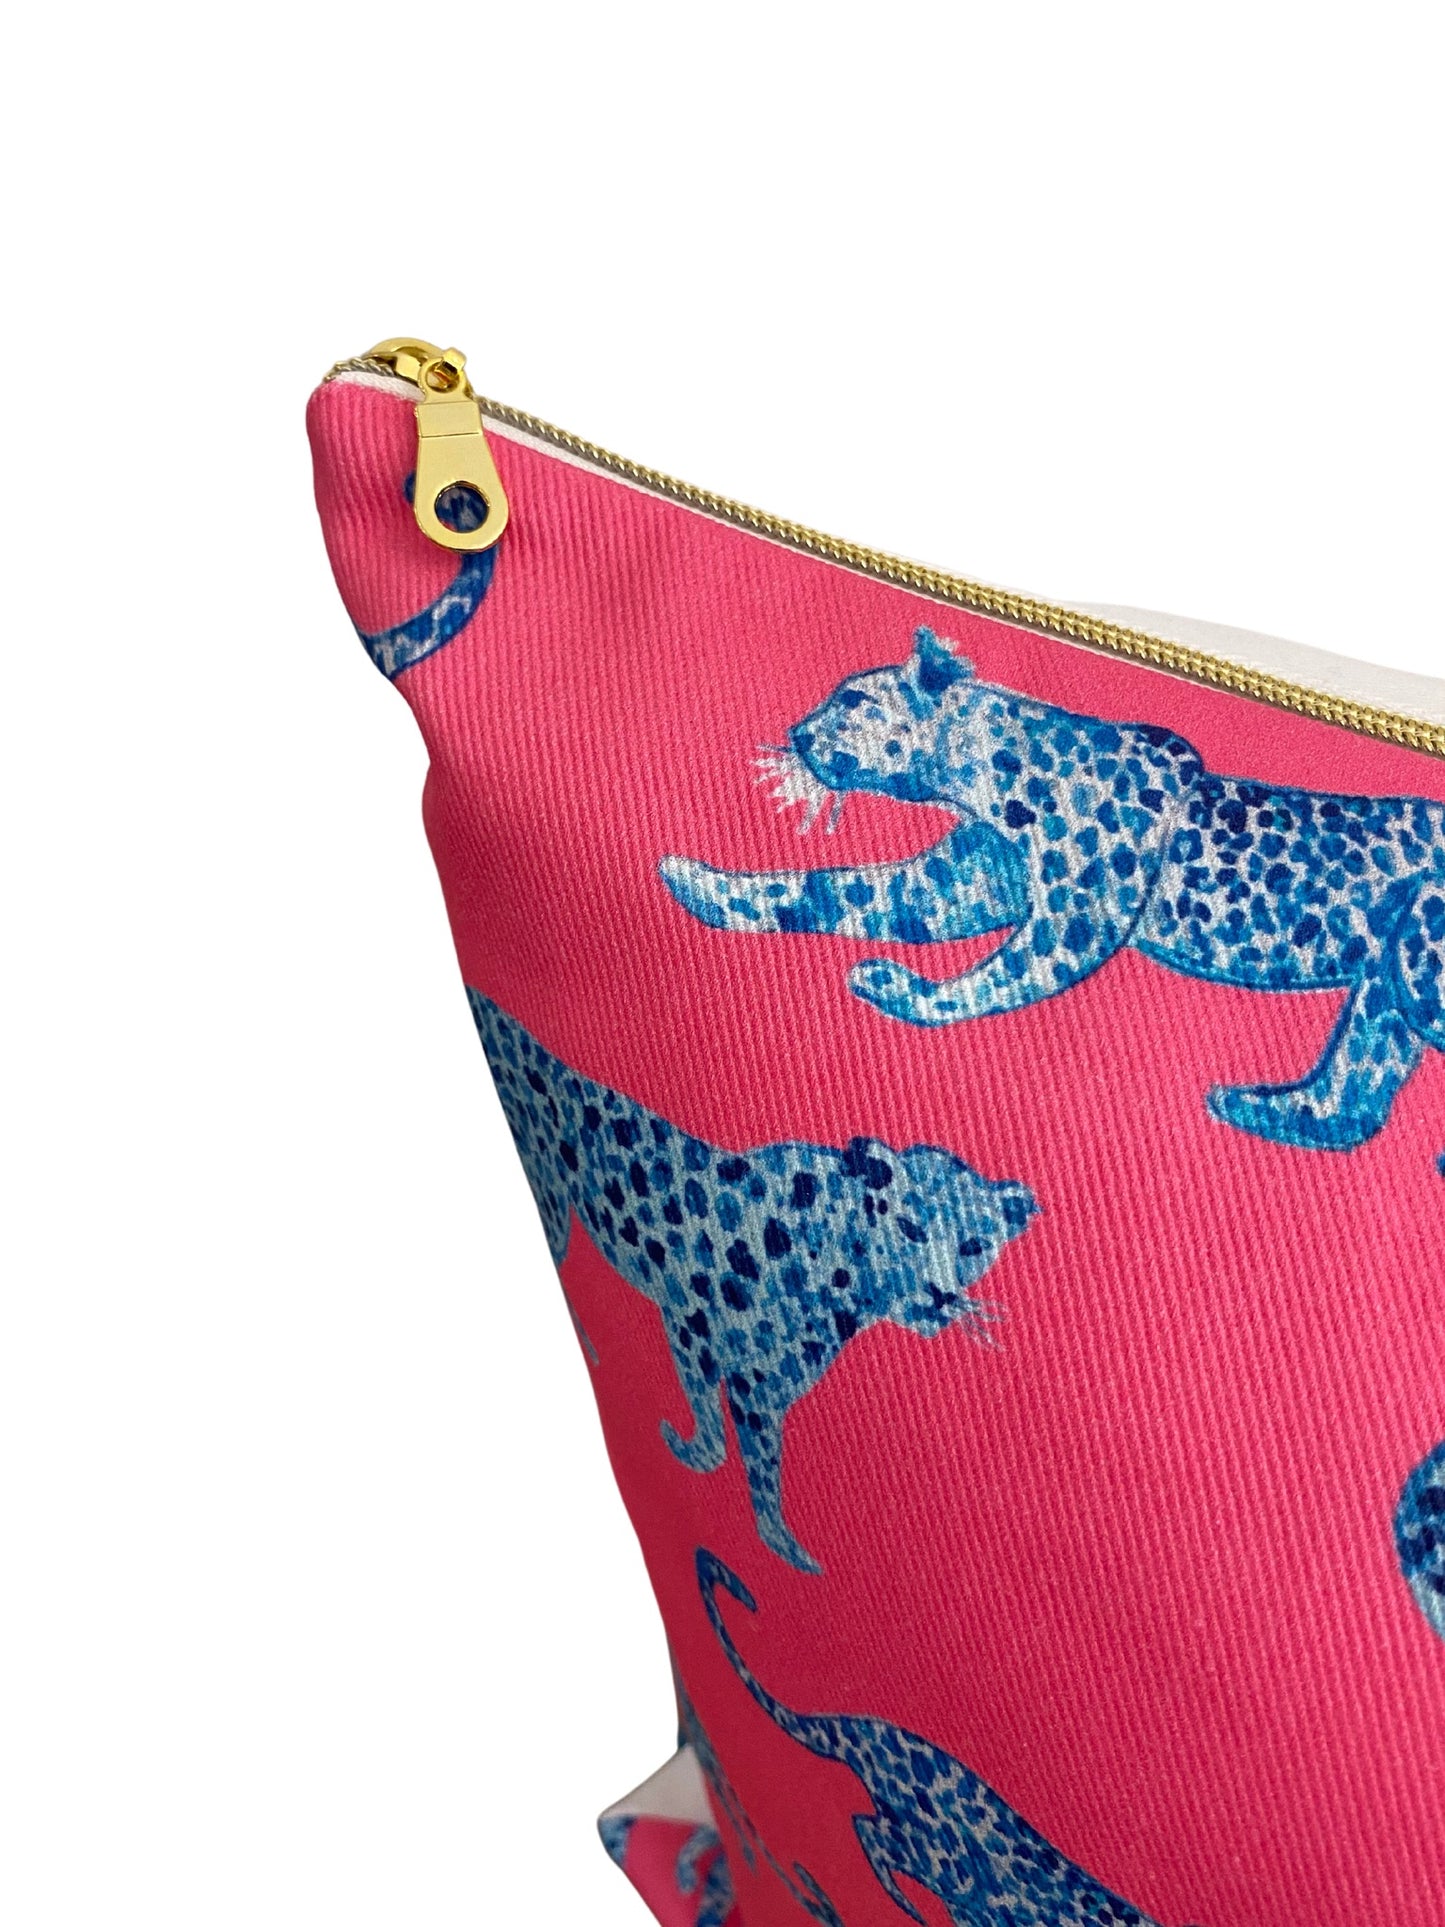 Pink and Blue Leopards Pillow Cover - Designed by Danika Herrick